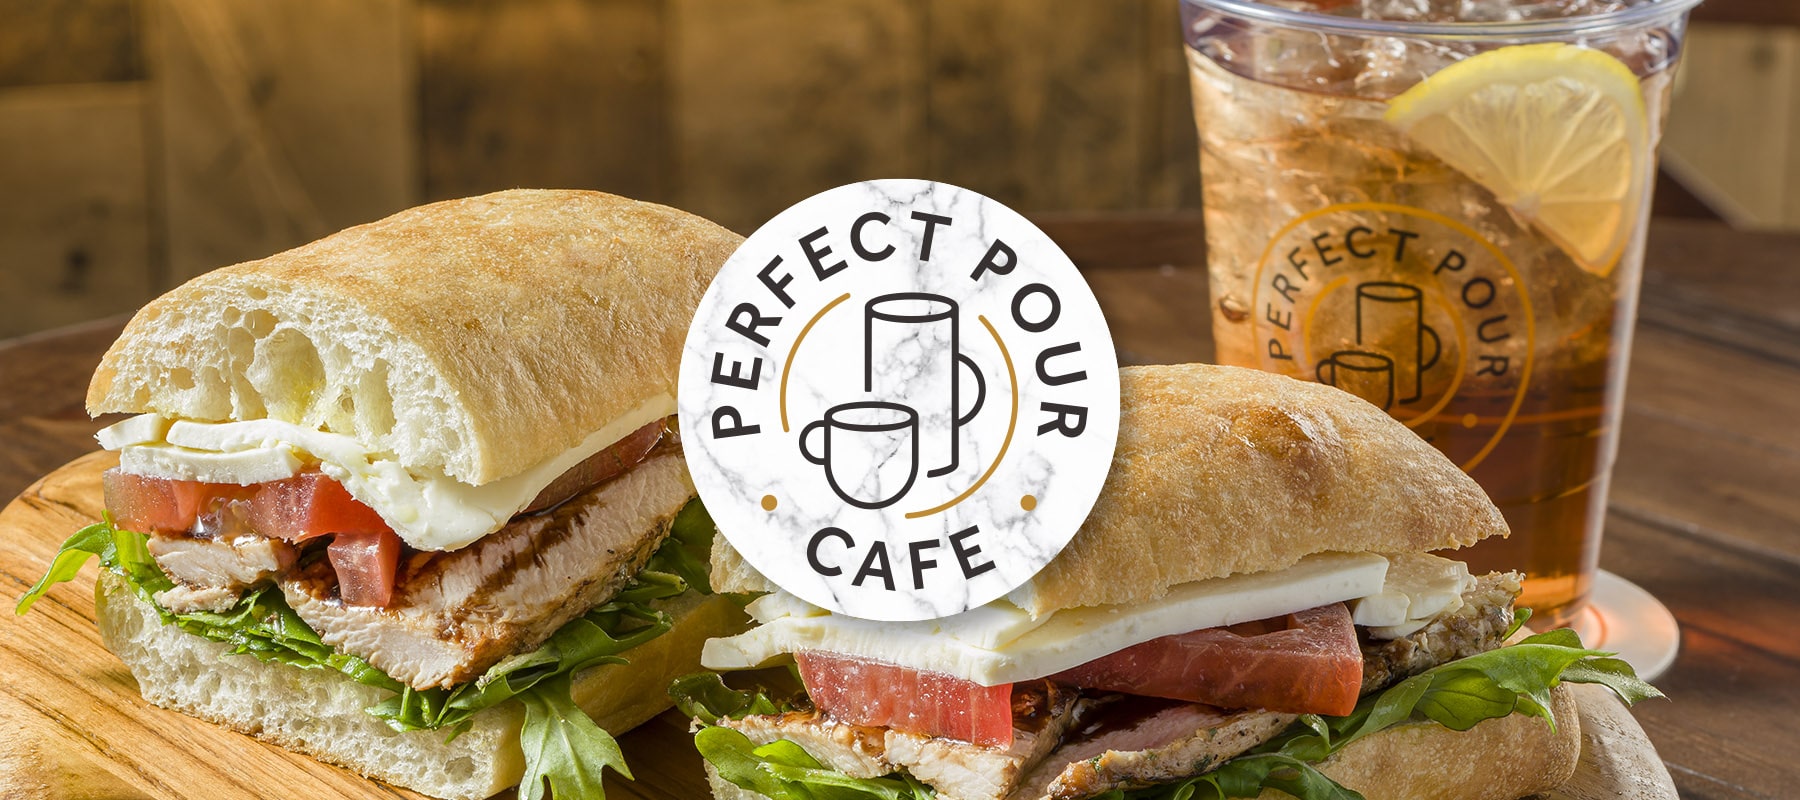 Club sandwich and iced tea with lemon at Perfect Pour Cafe